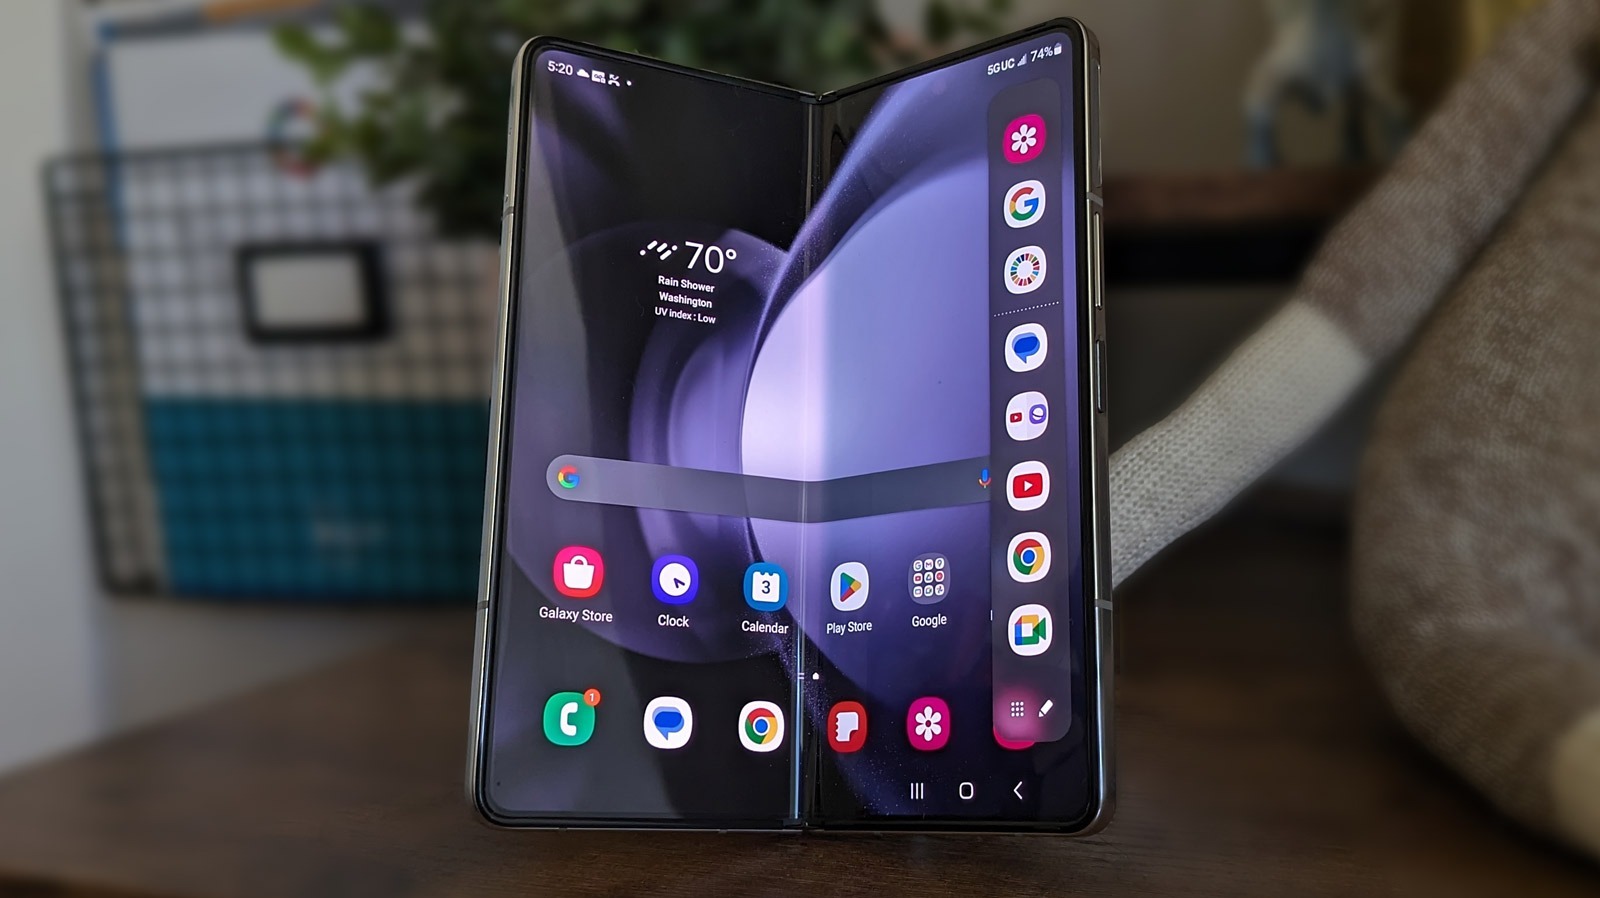 Why the Samsung Galaxy Z Fold 5 is the best foldable phone, according to  our review